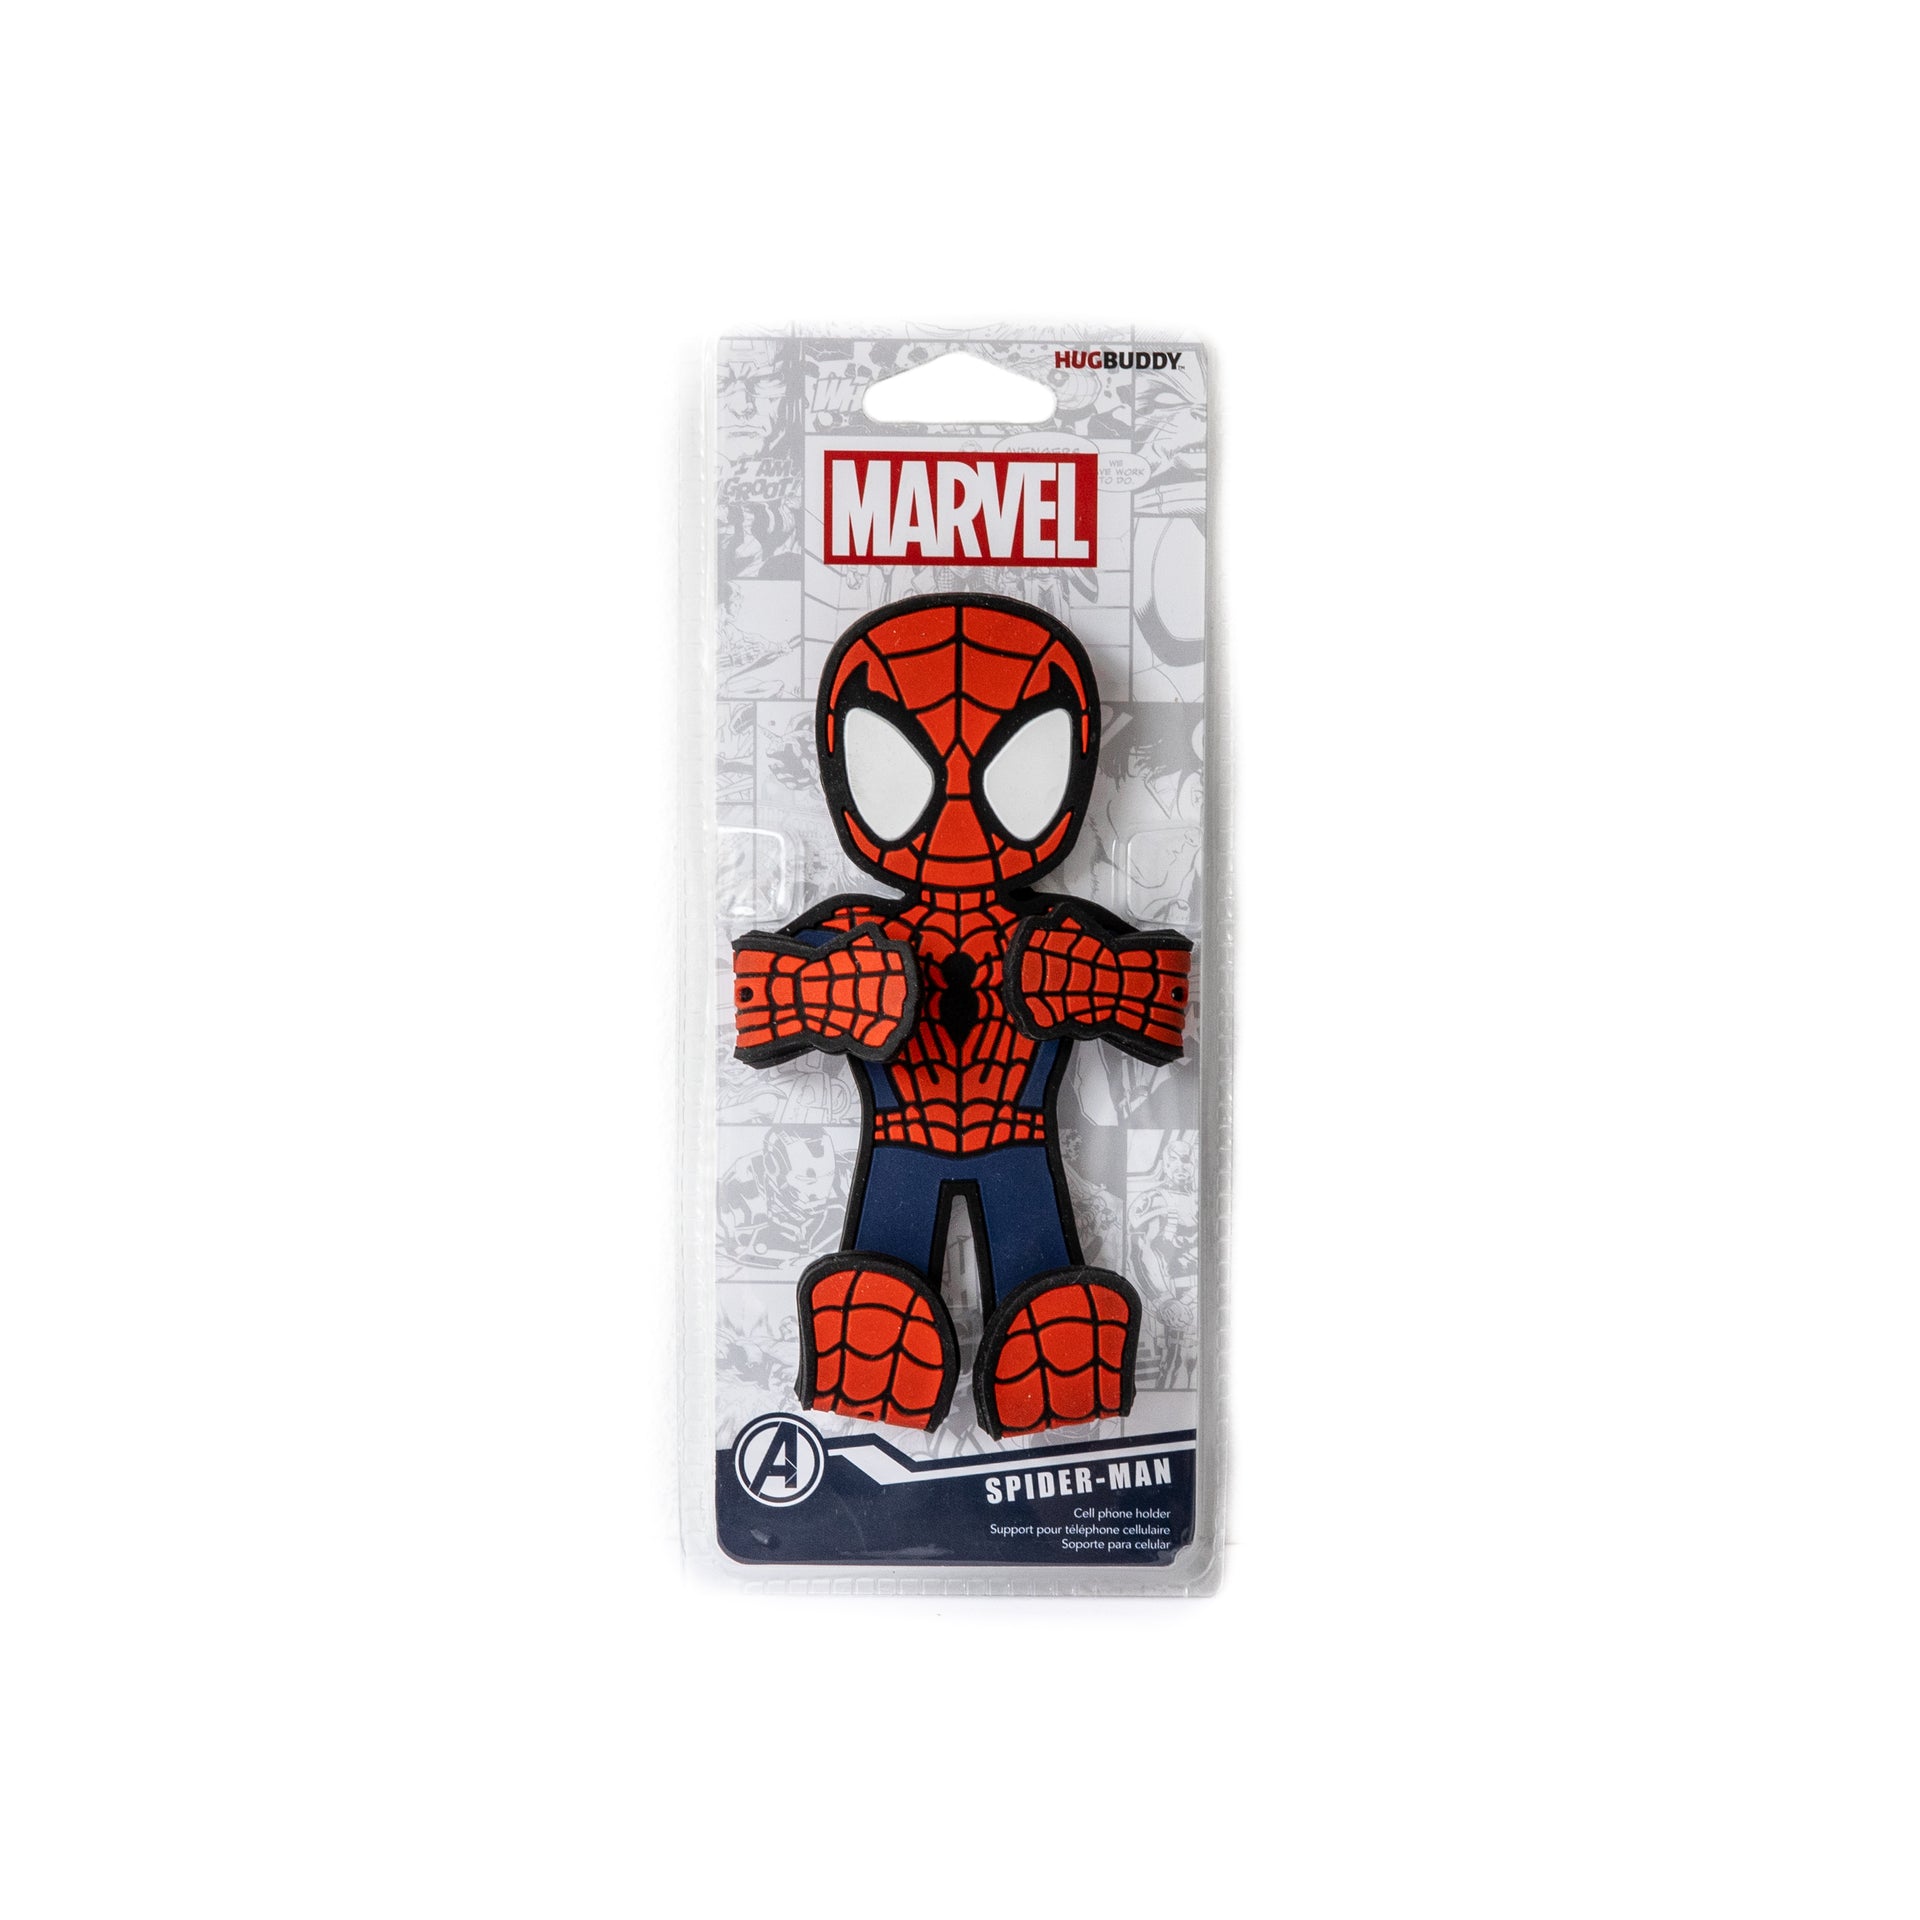 Image of Marvel Comics Spider-Man Hug Buddy packaging front view